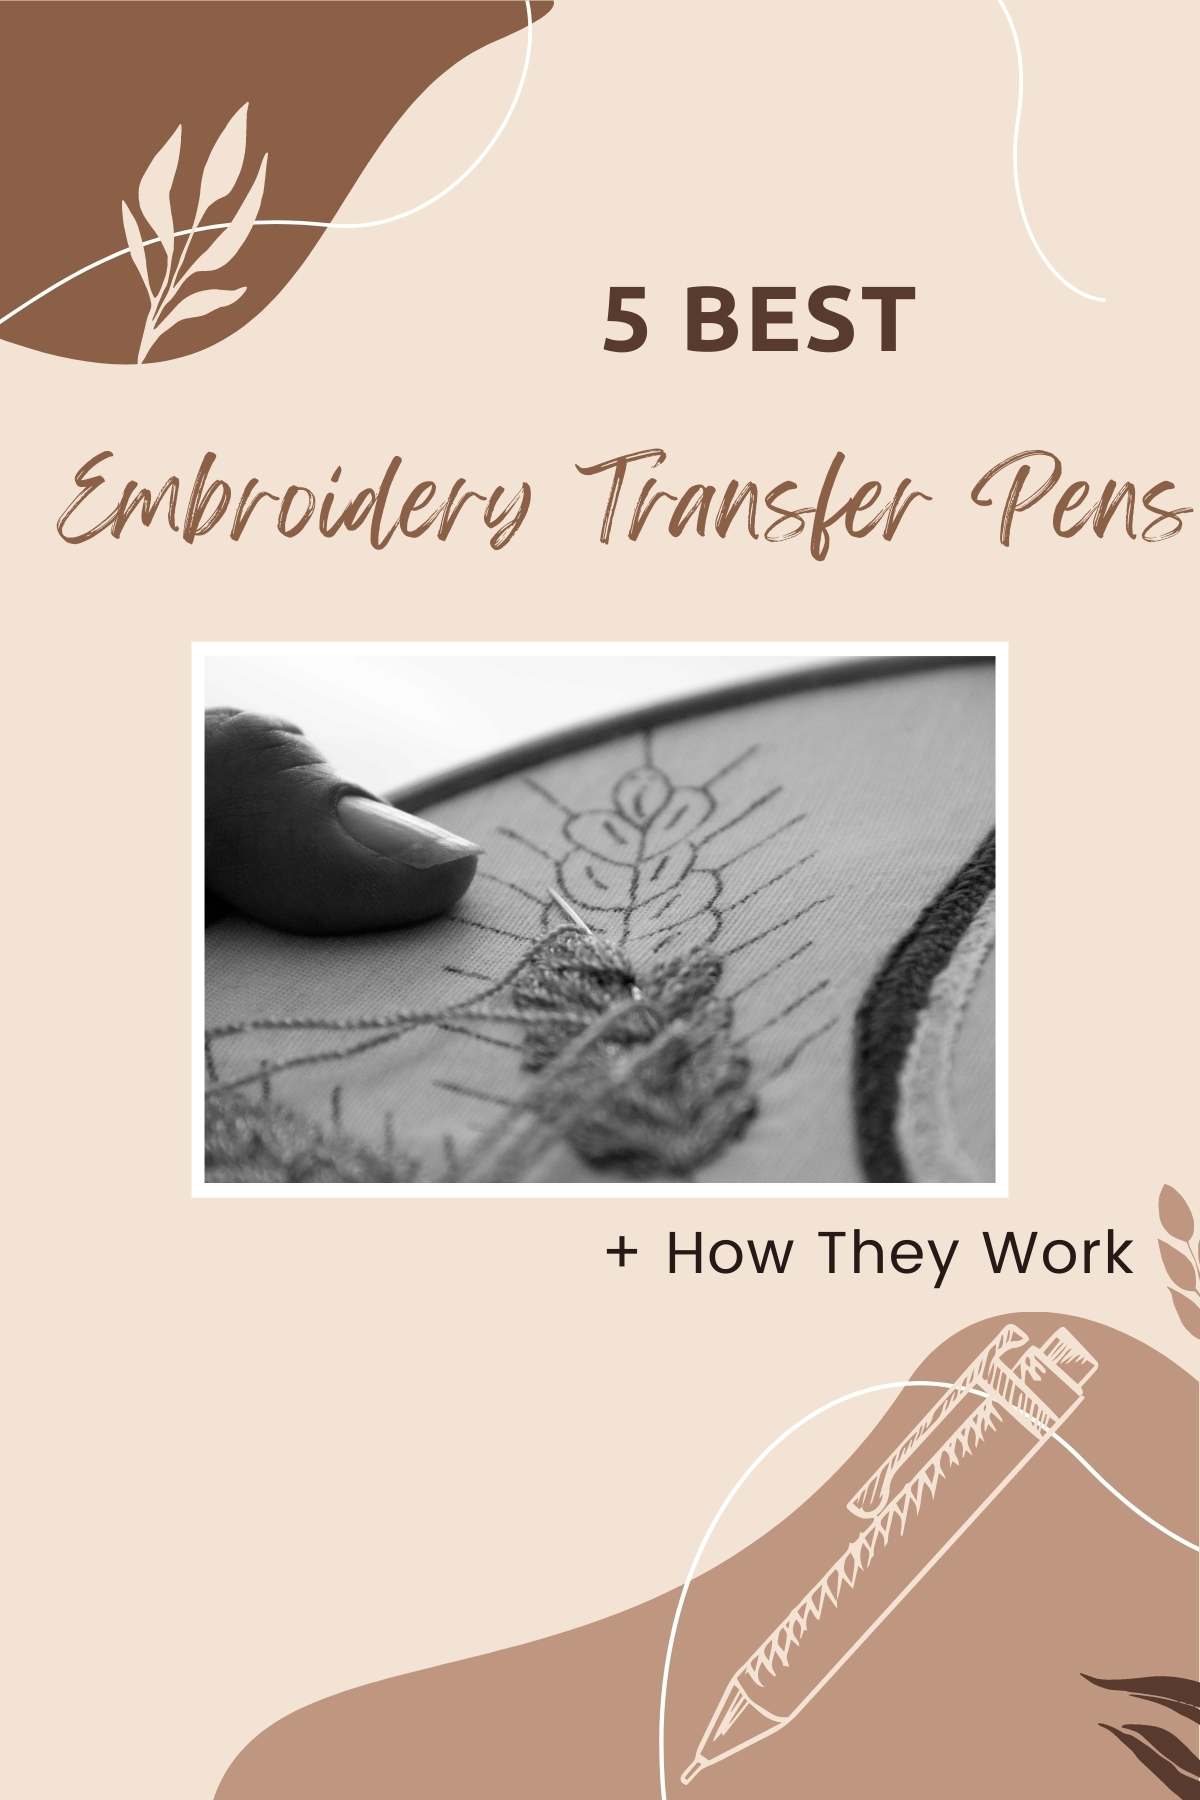 How Do Embroidery Transfer Pens Work?